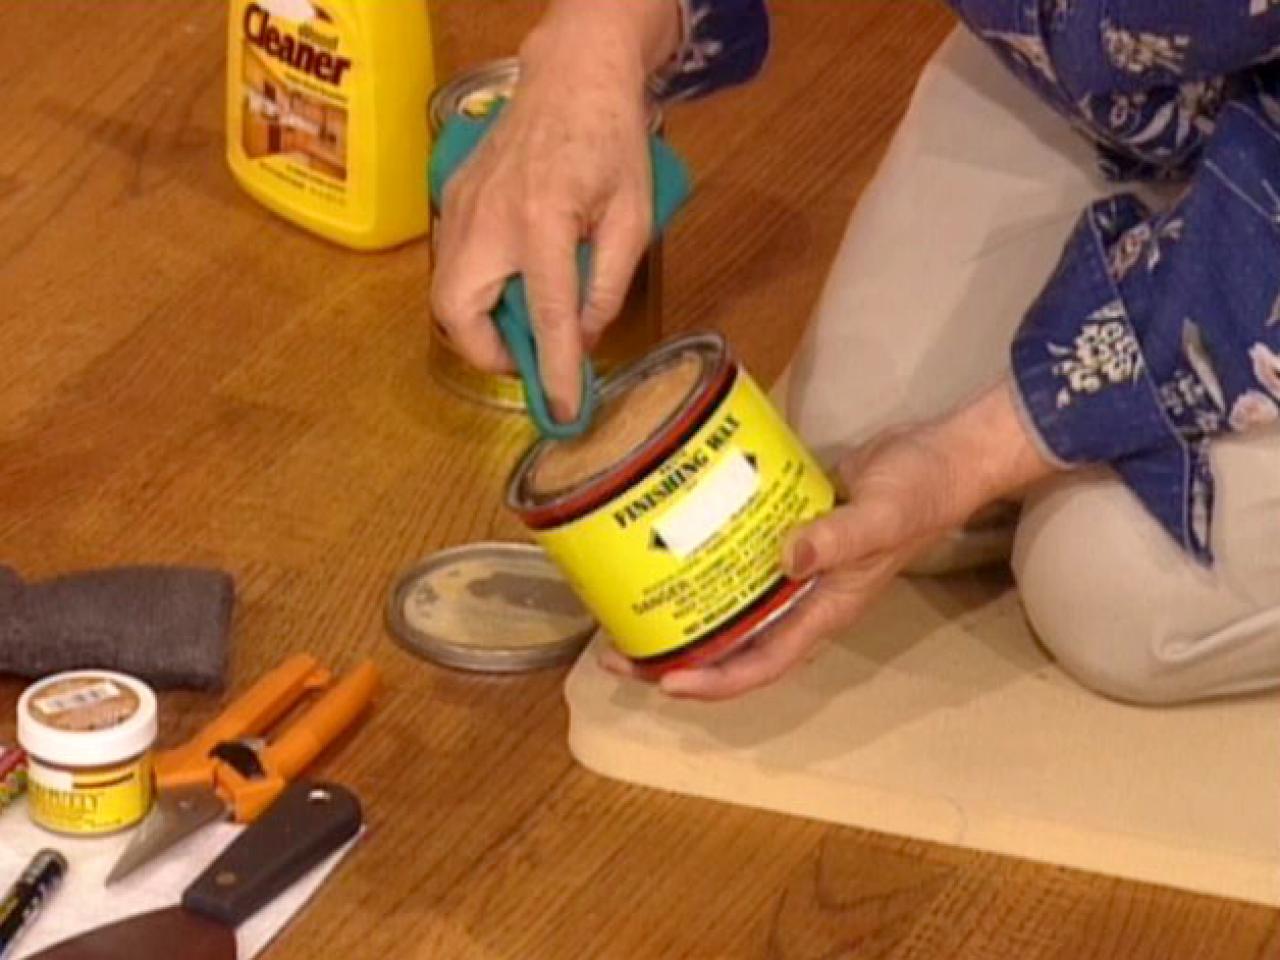 How To Touch Up Wood Floors Tos Diy, How To Wax Hardwood Floors